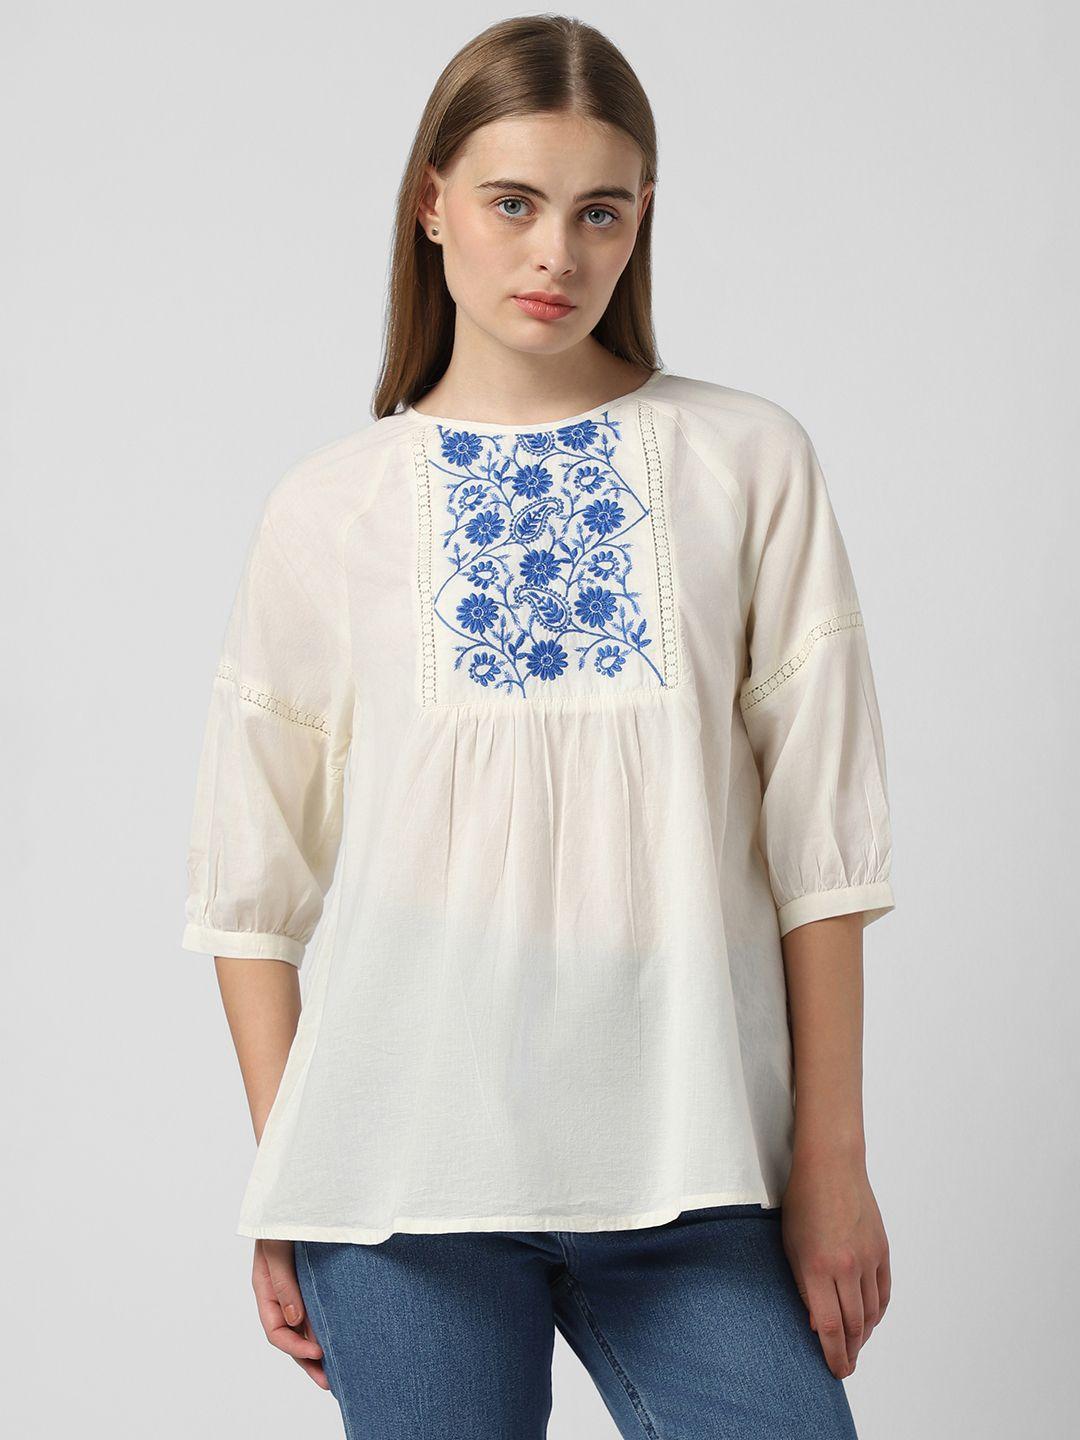 van heusen woman floral embroidered pure cotton top